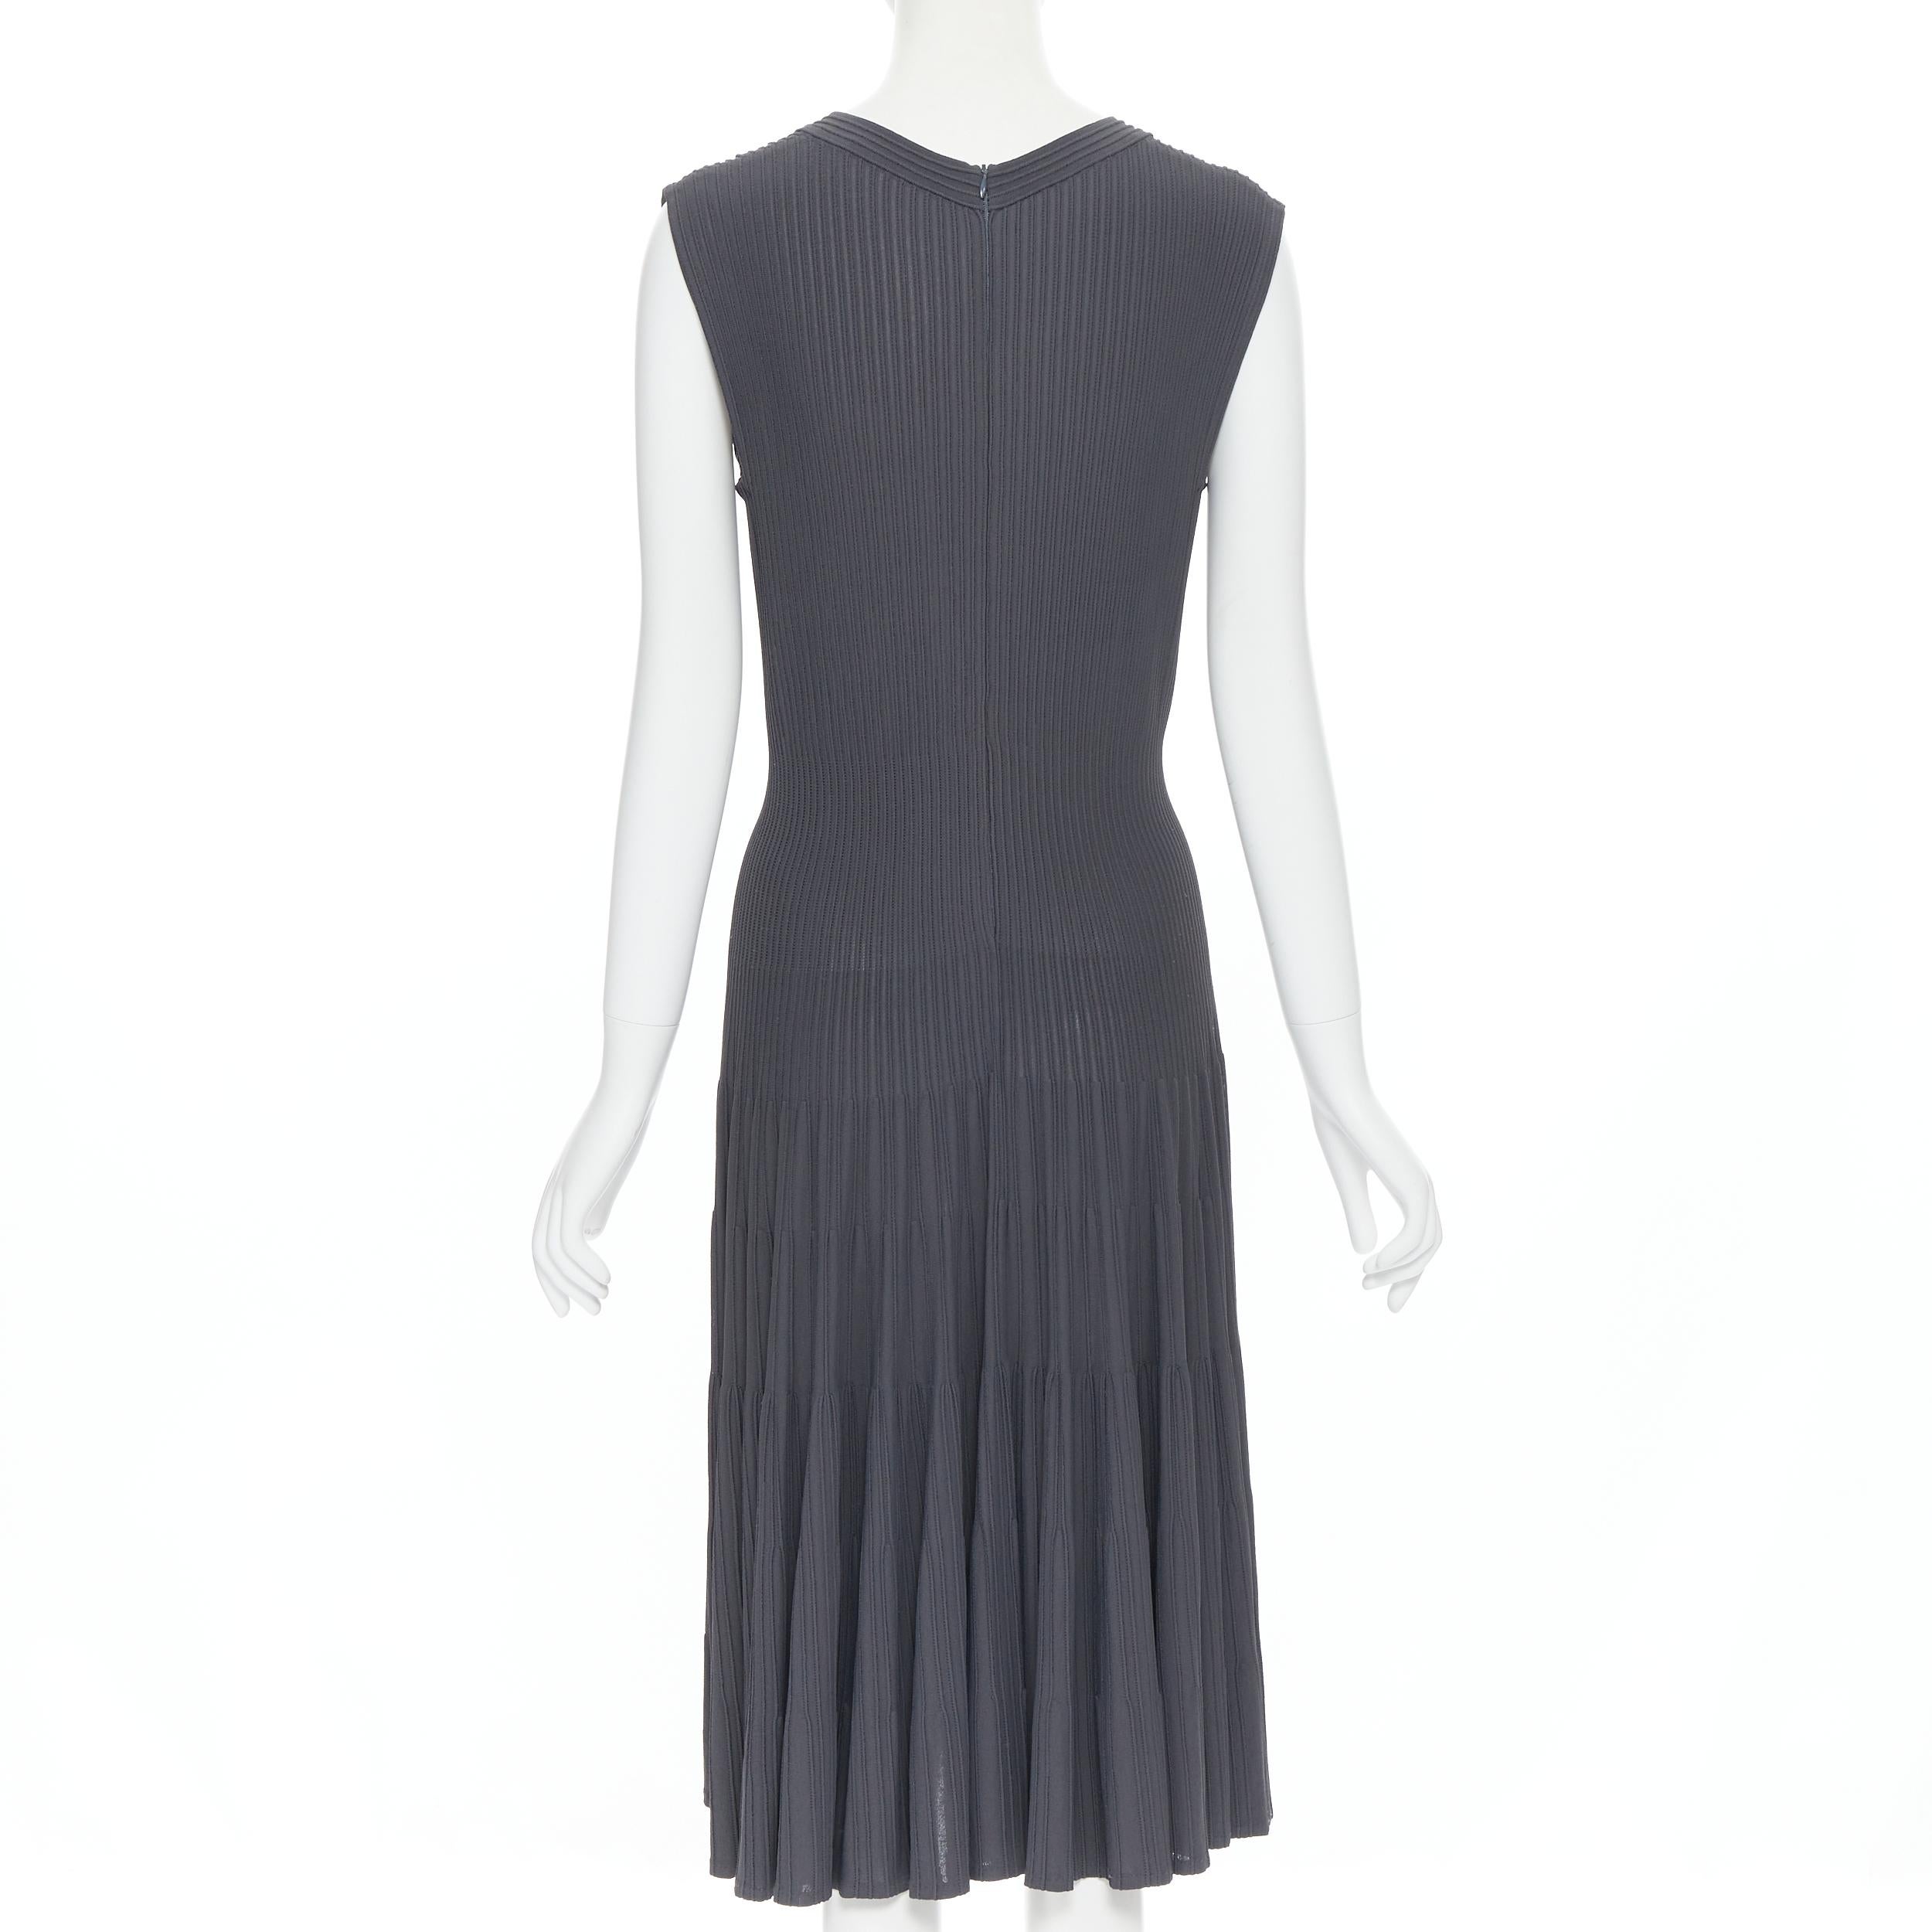 ALAIA dust grey ribbed V-neck sleeveless fit flared cocktail dress M 1